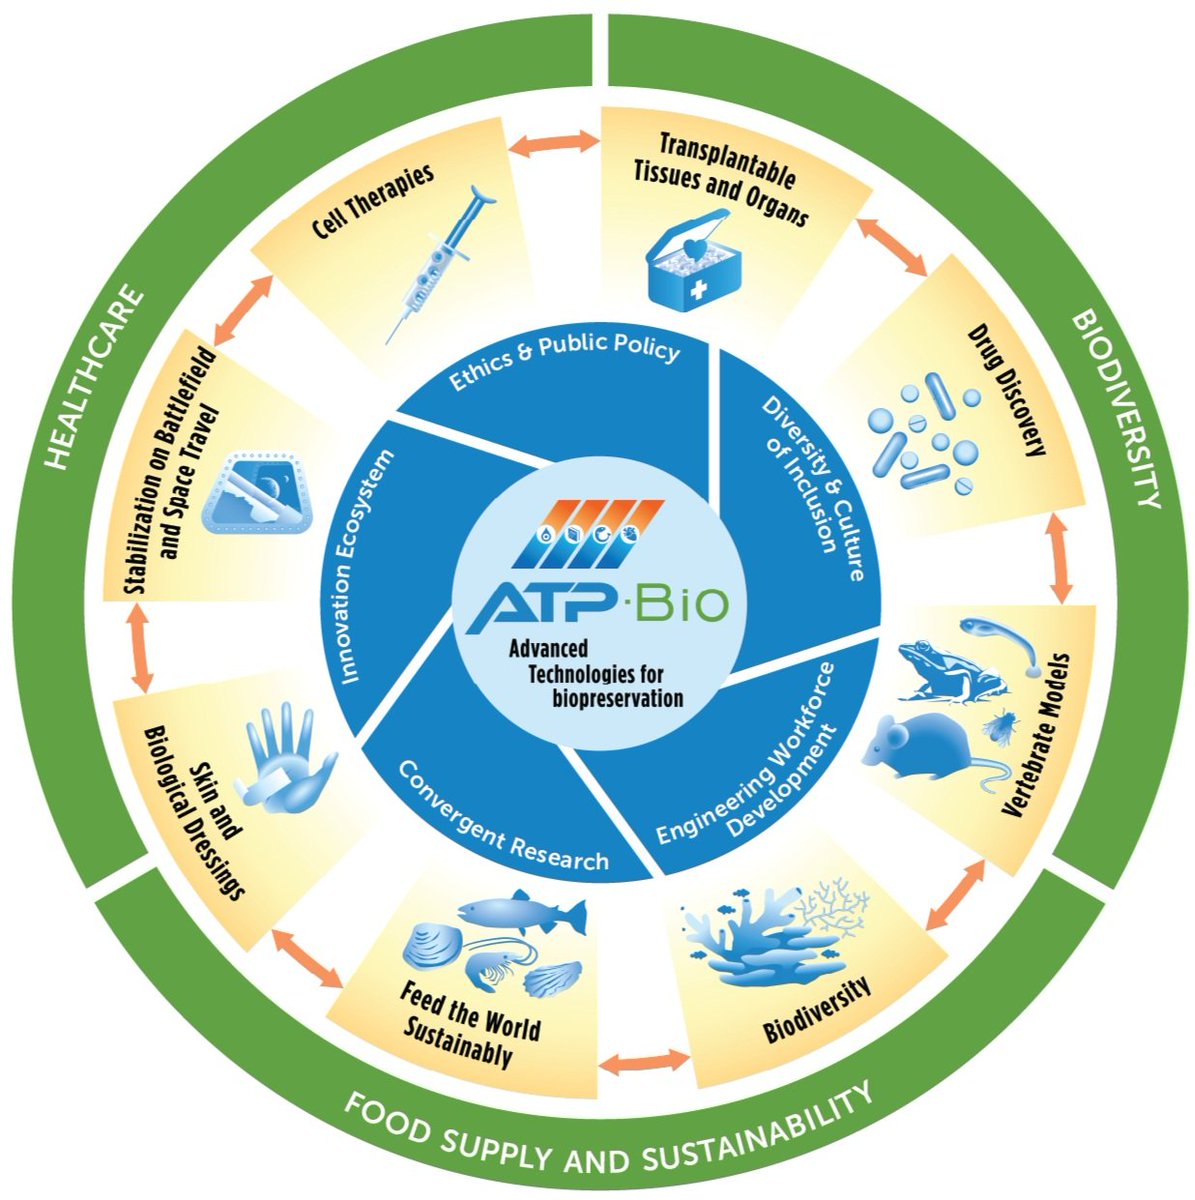 PanTHERA CryoSolutions is happy to be an industry partner with ATP-Bio Program. ATP-Bio supports the crucial advancement of biopreservation technologies and enables innovation, commercialization, and diverse workforce development. buff.ly/3Z7QYDM #partnerships #atpbio